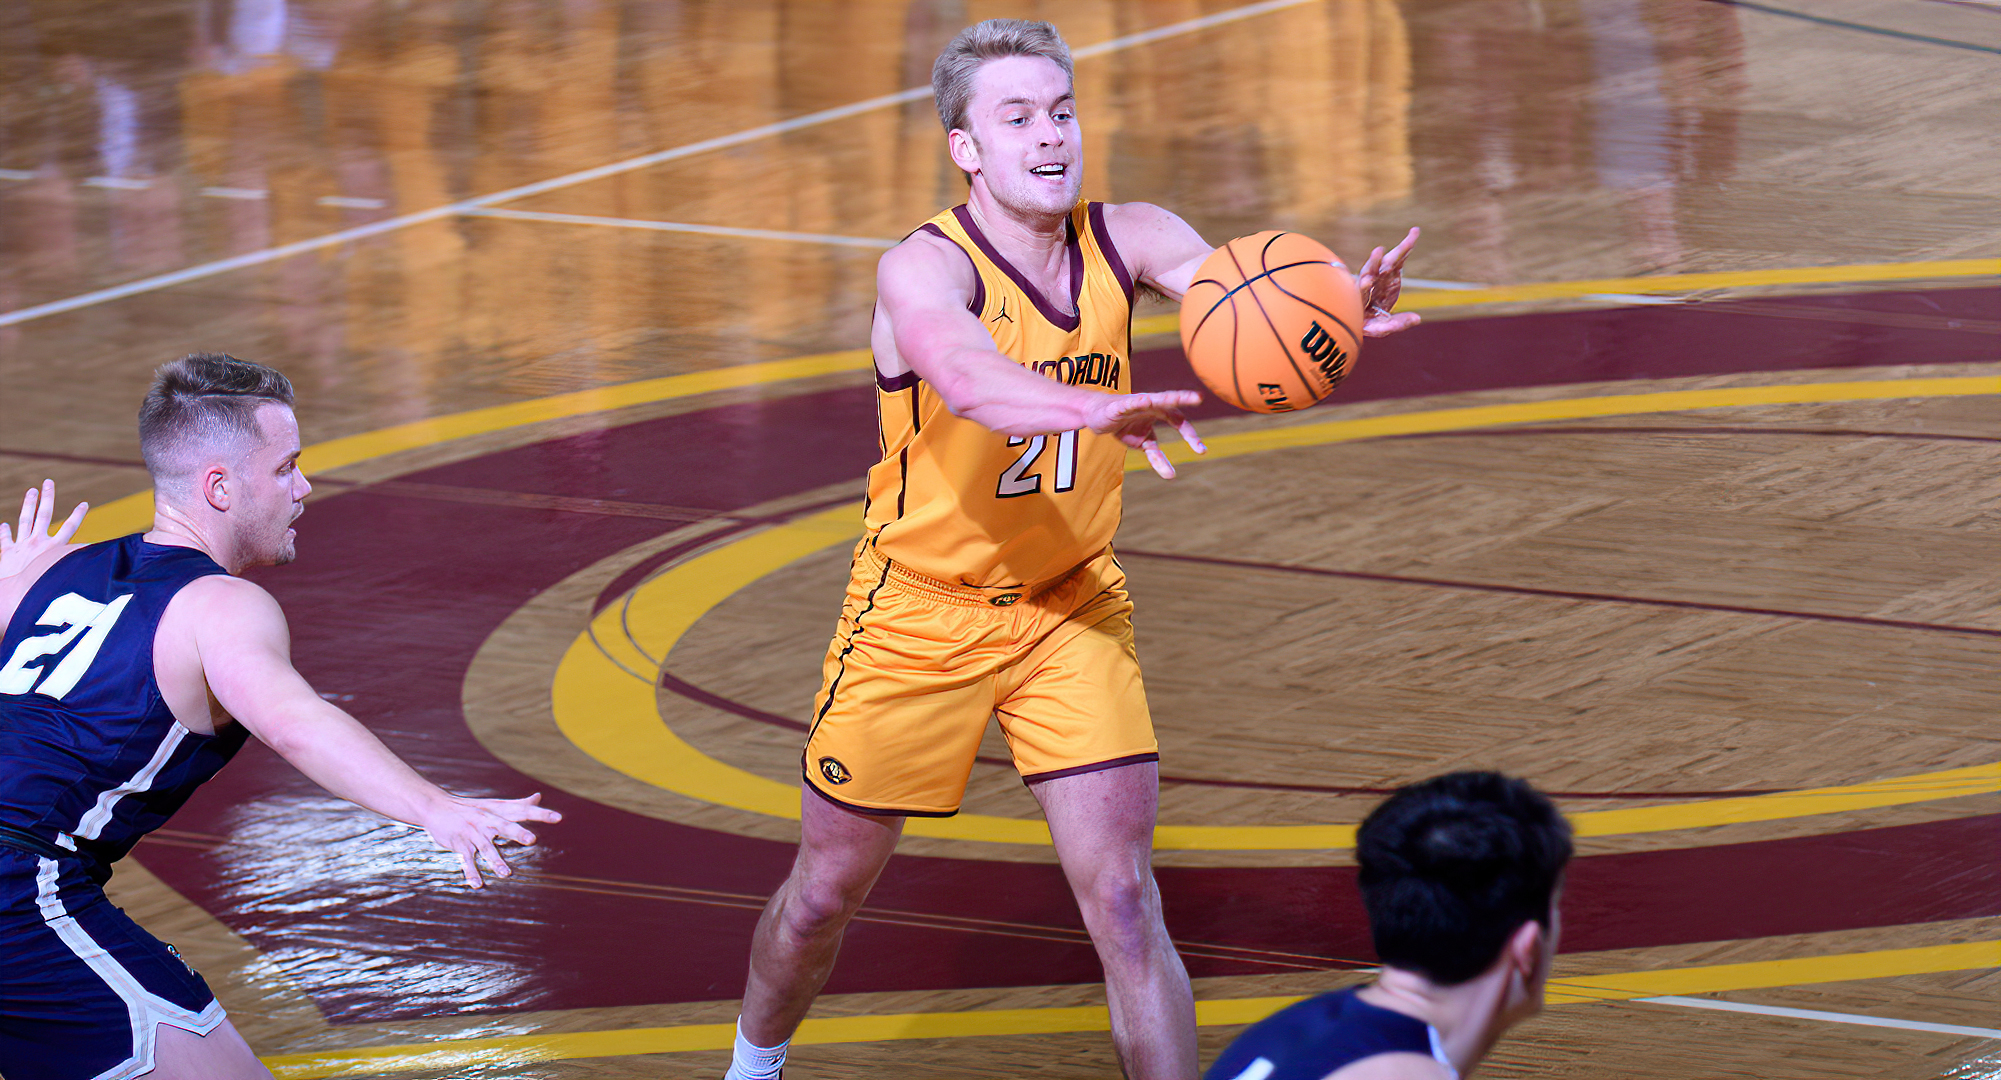 David Birkeland scored 11 points in the Cobbers' game at St. Scholastica. He has posted at least 10 points in two of the last four games for CC.          